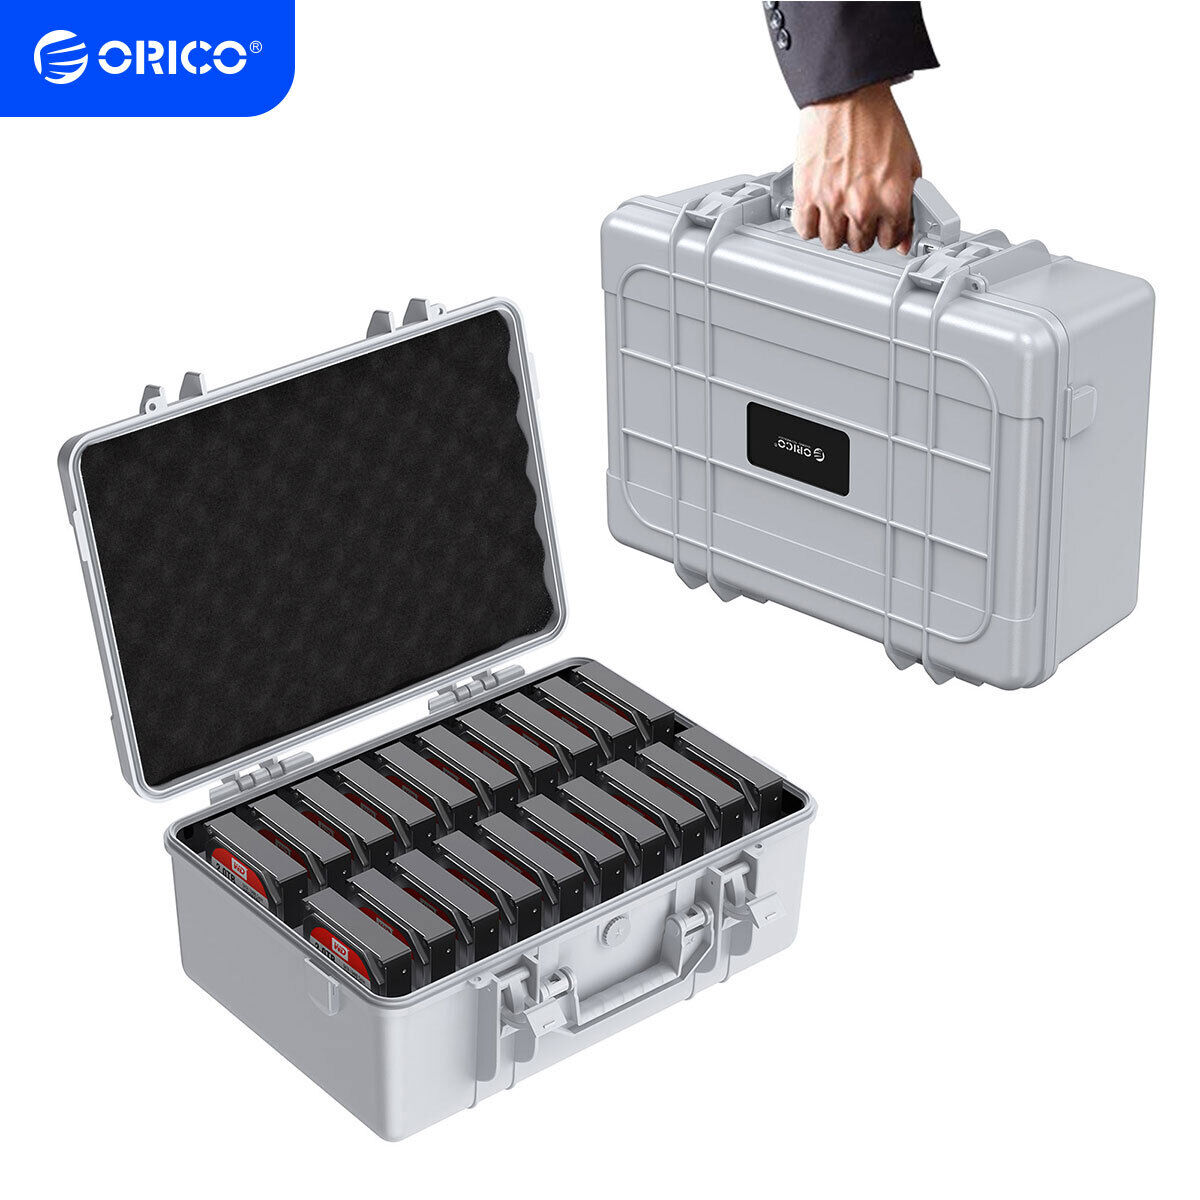 ORICO Hard Drive Case 3.5in 20Bay HDD/SSD Multi-Protection Storage Suitcase Gray